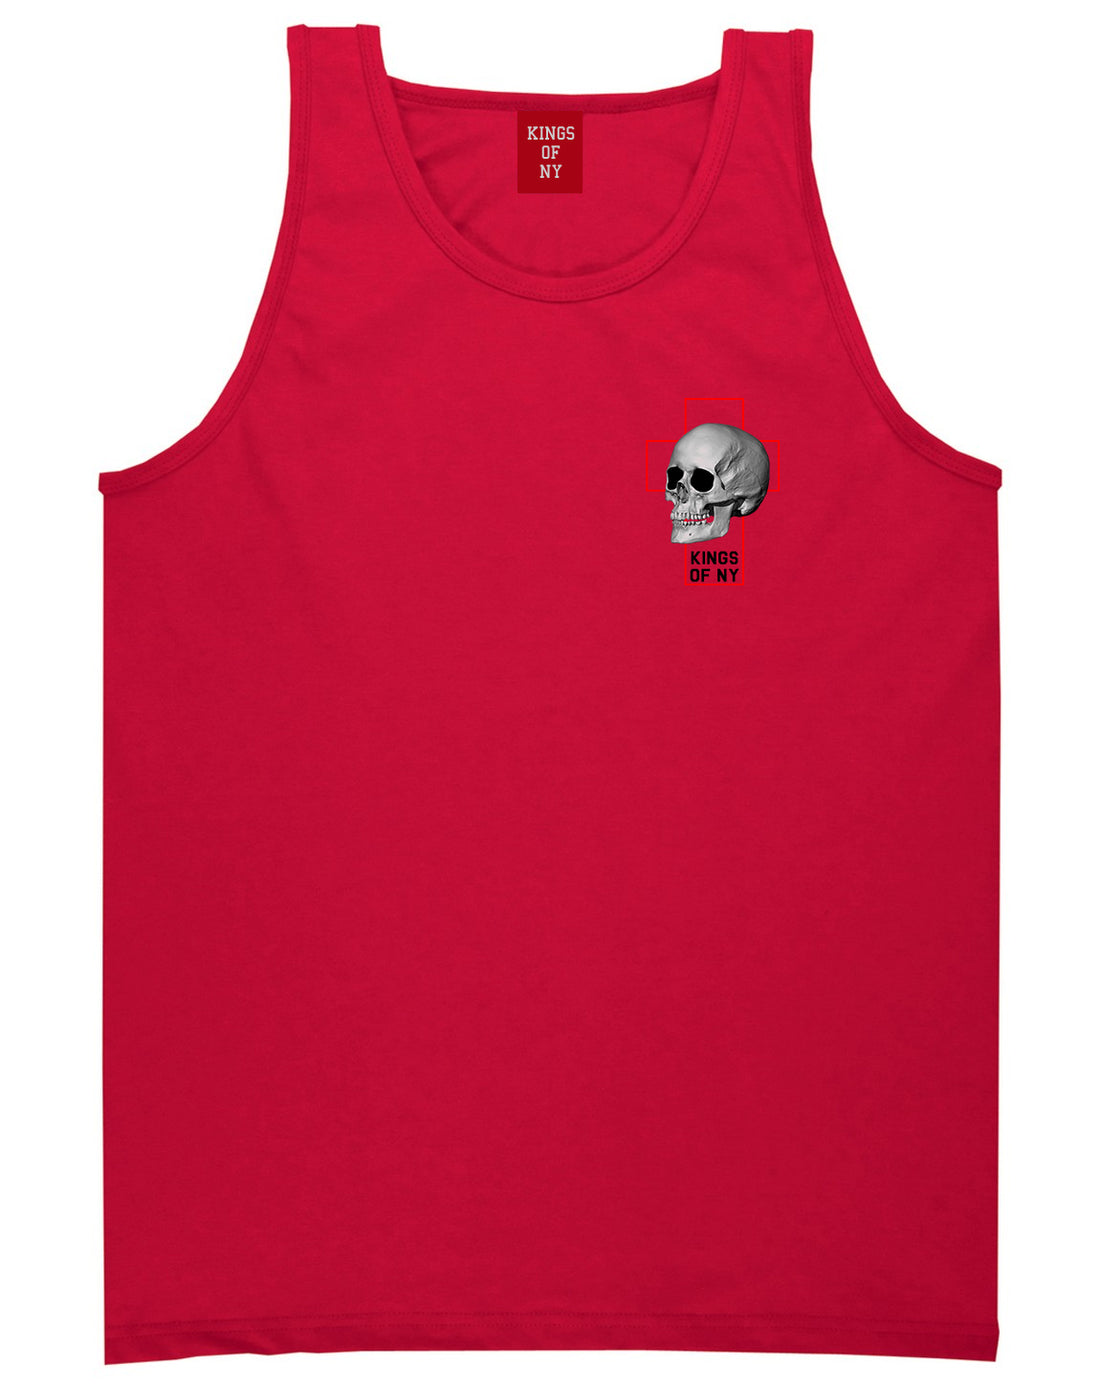 Cross And Skull Chest Mens Tank Top Shirt Red by Kings Of NY